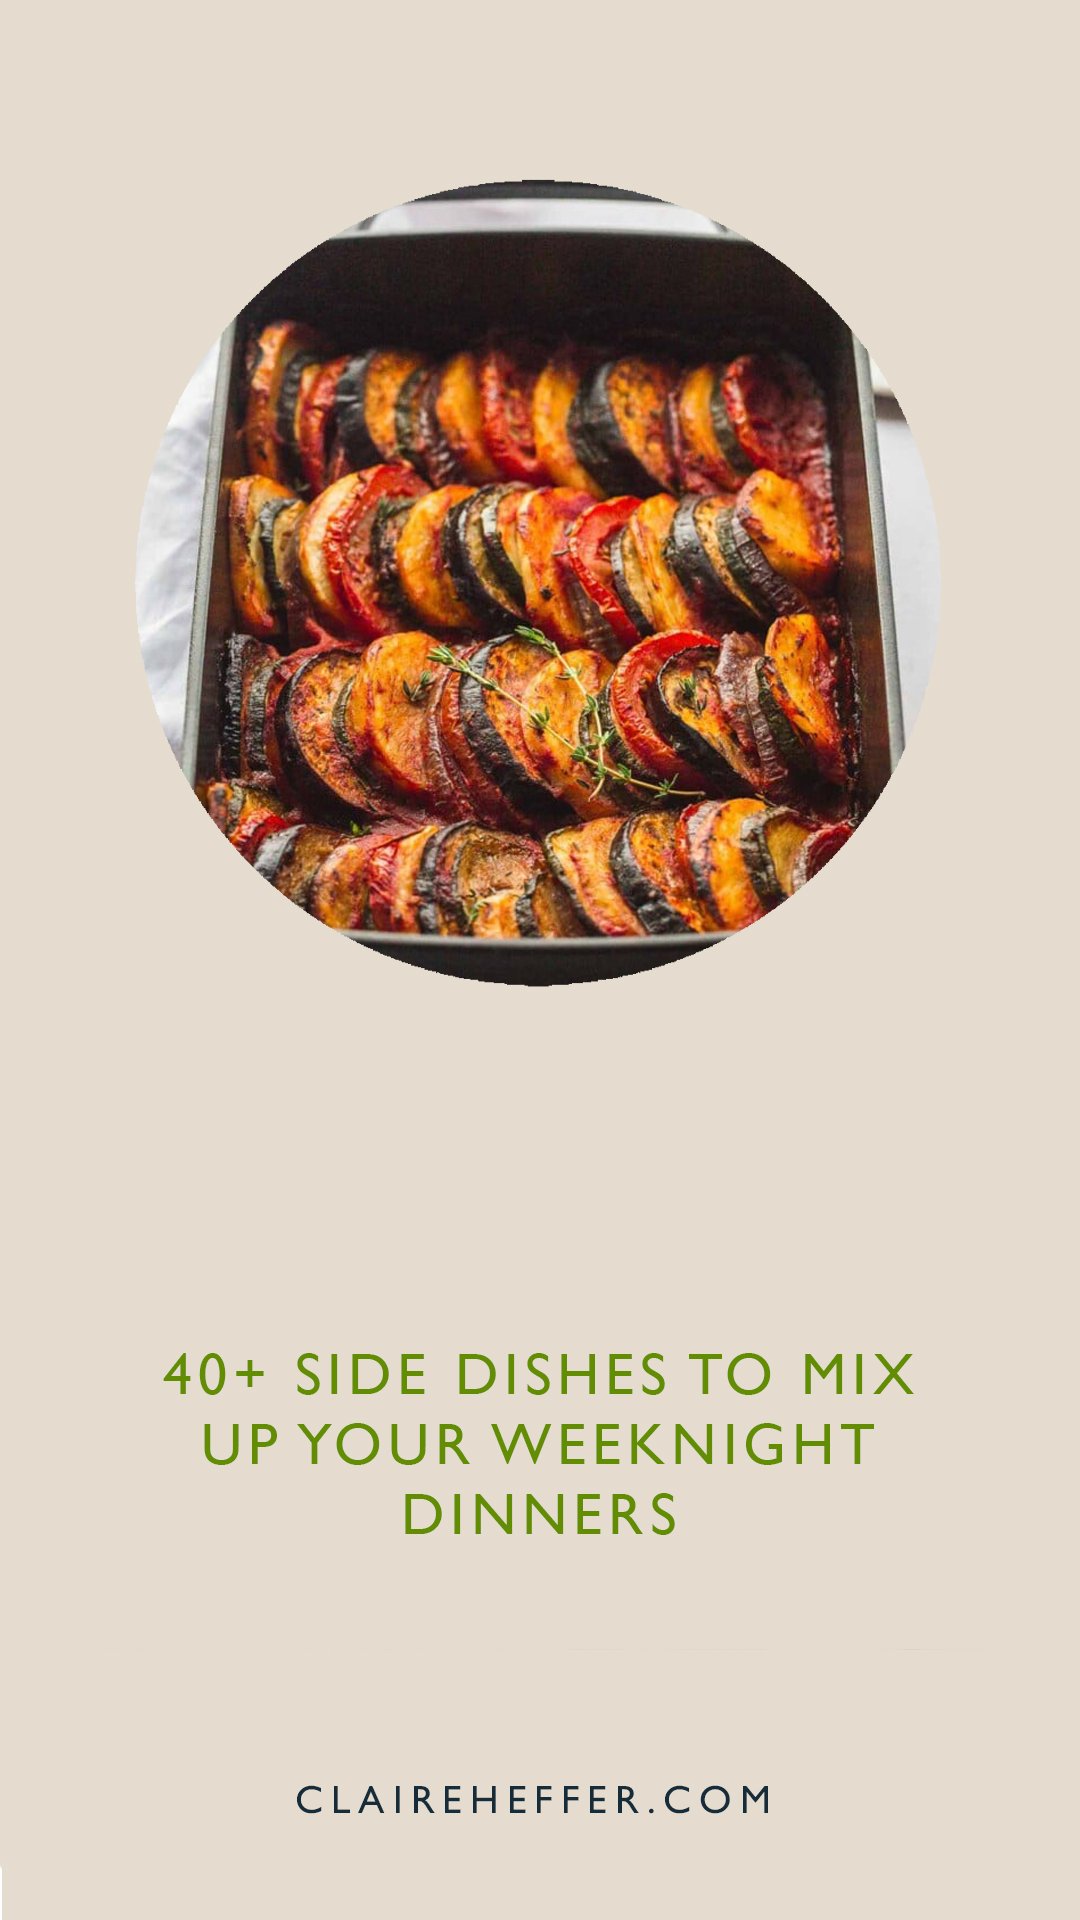 ide Dishes For When You Need Dinner Inspiration, Dishes For When You’re Stuck For What Put On The Side Of Your Plate,  Side Dish Inspiration, Veggie Side Dish Inspiration, Pasta Salad, 